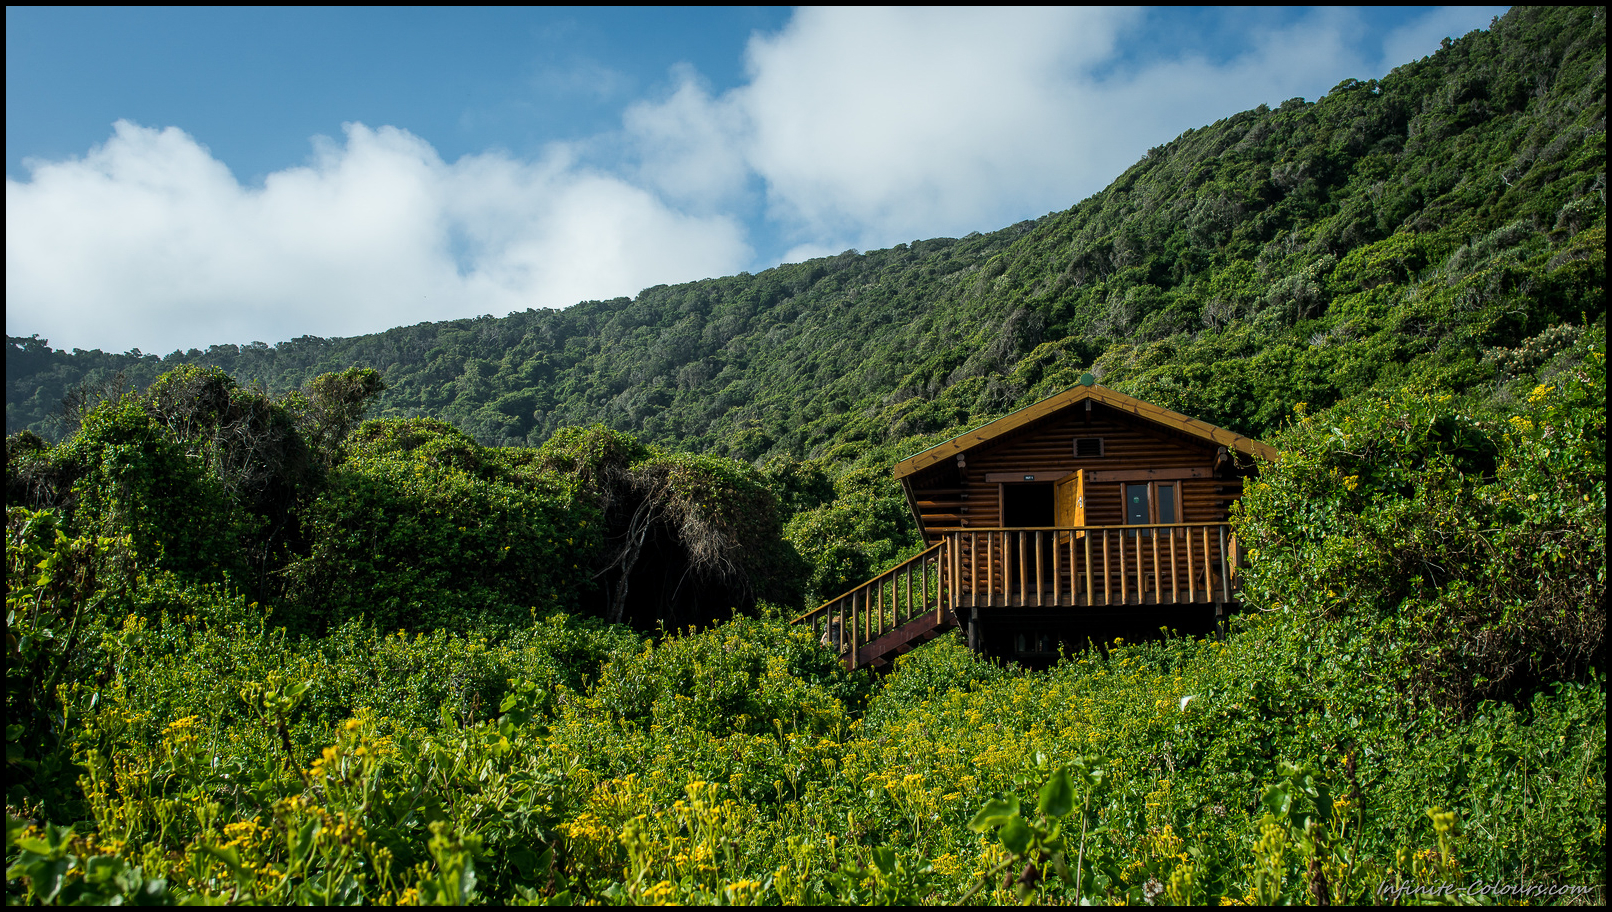 First home on the trail are the beautifully situated Ngubu huts